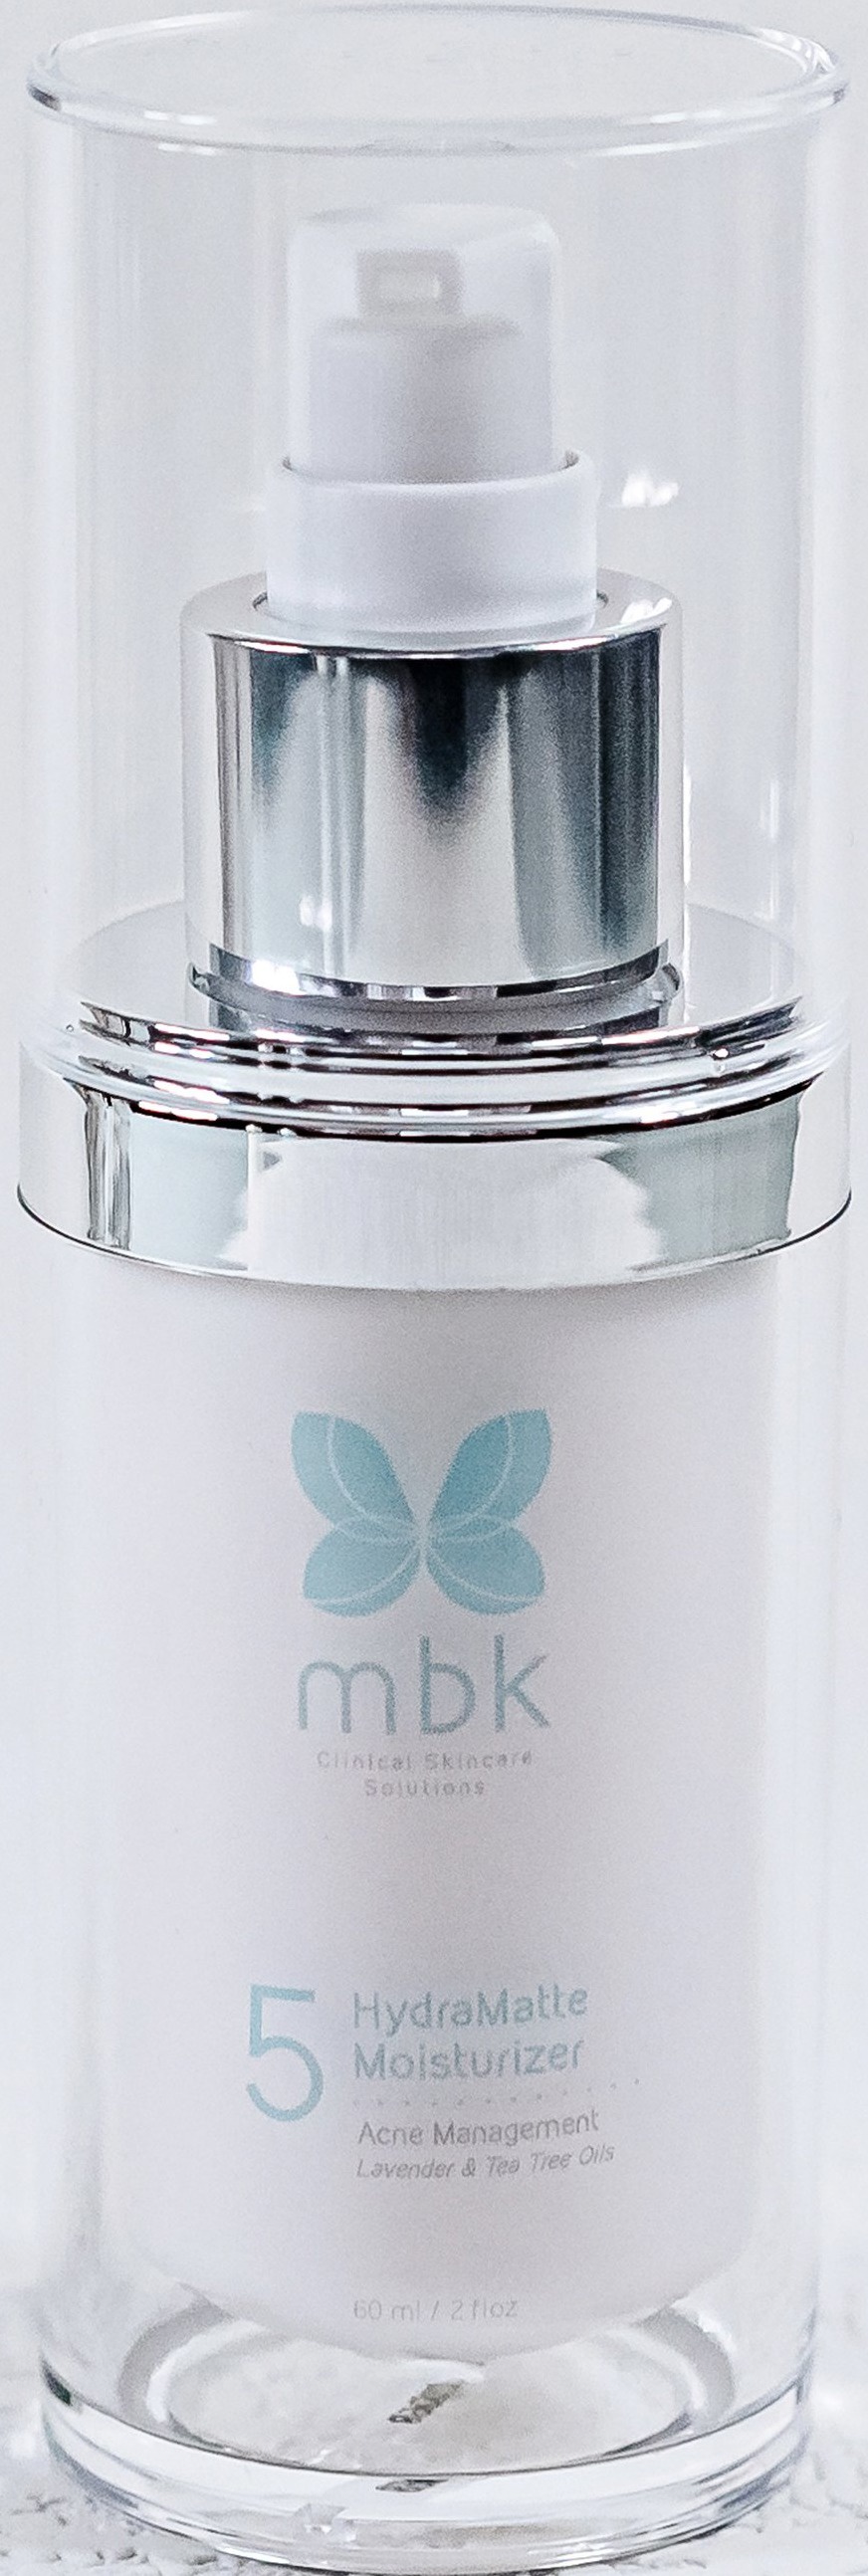 MBK Clinical Skincare Solutions Hydramatte Moisturizer